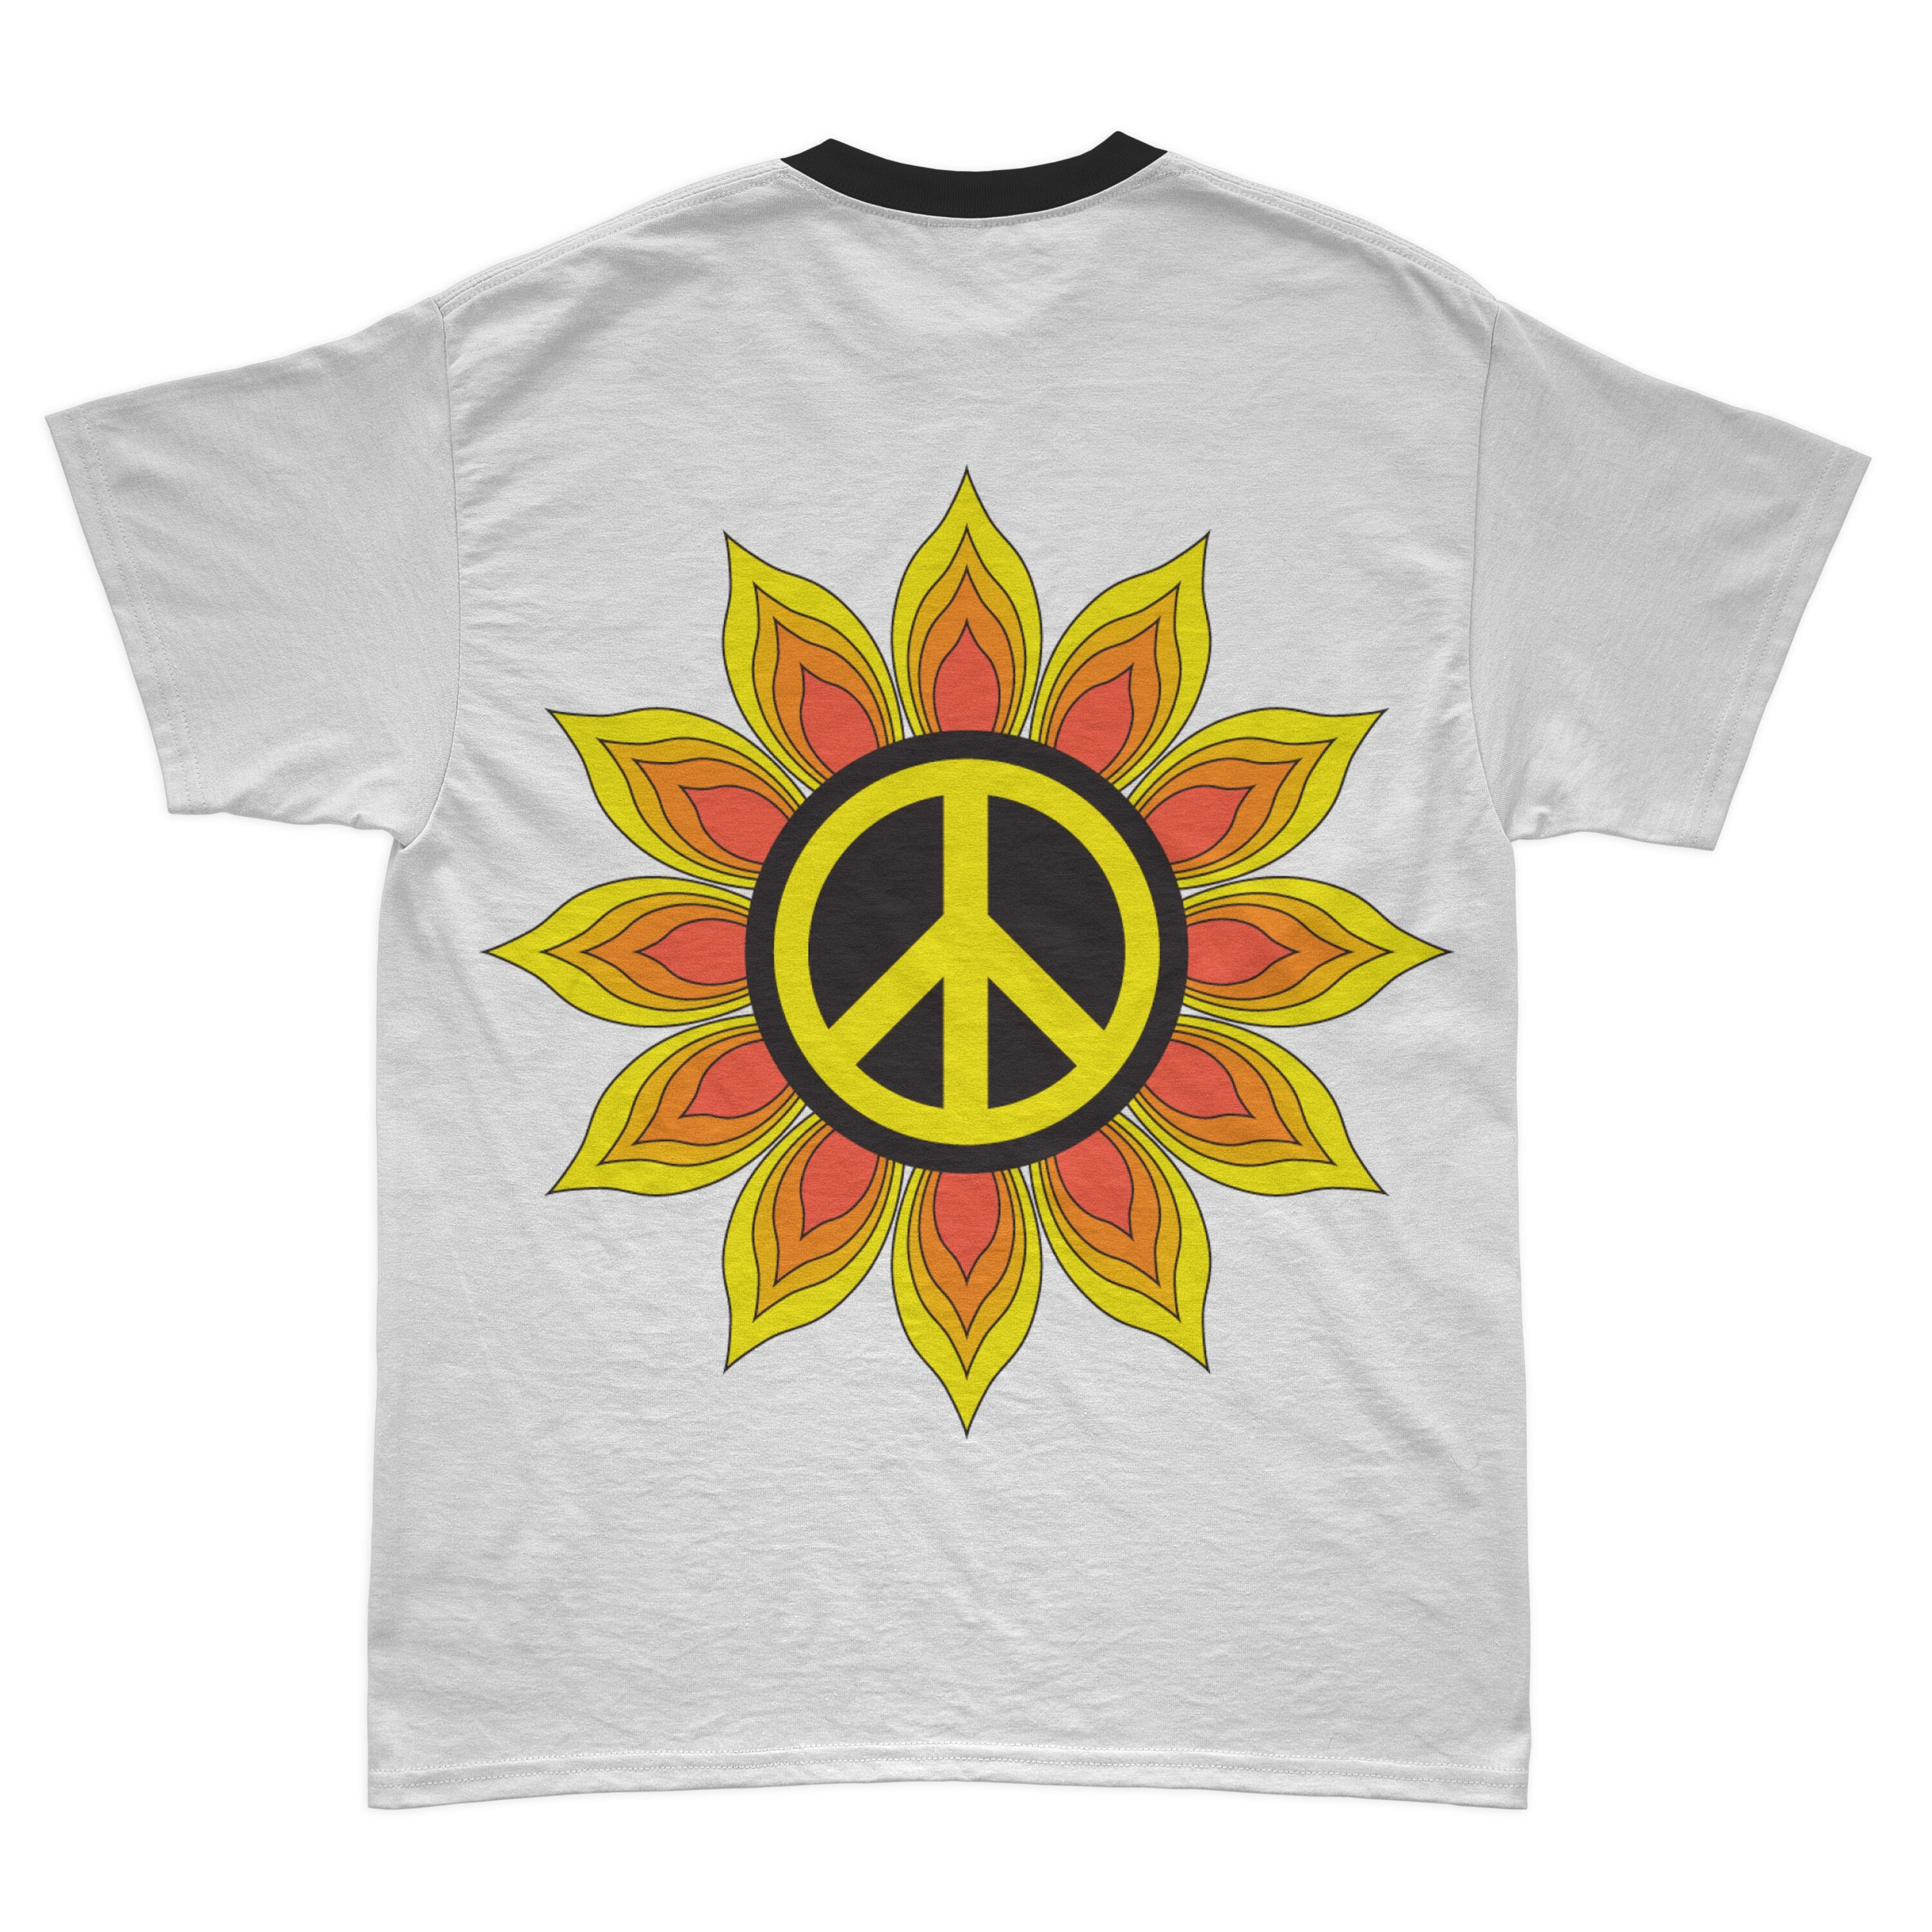 Add some hippie vibes to your designs.